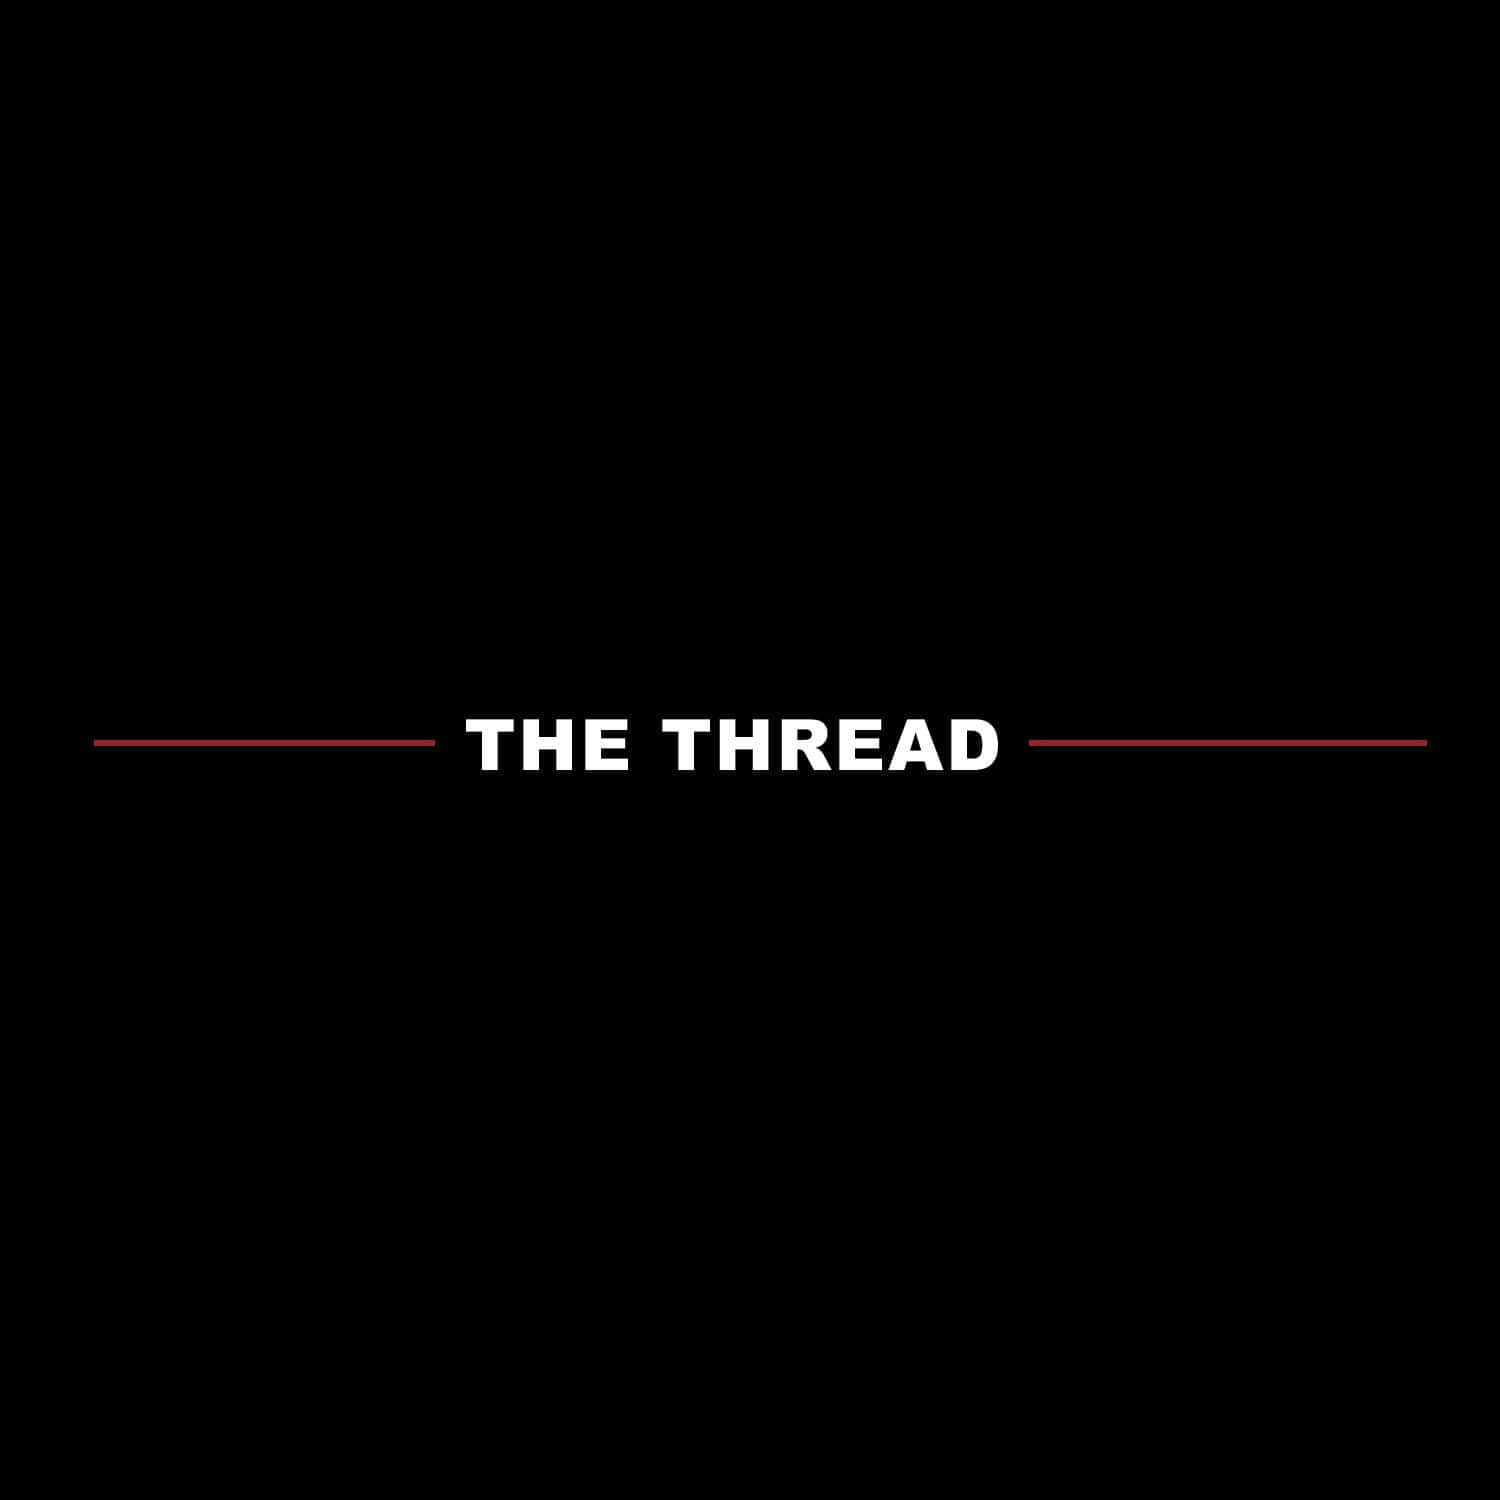 The Thread Logo On A Black Background Wallpaper